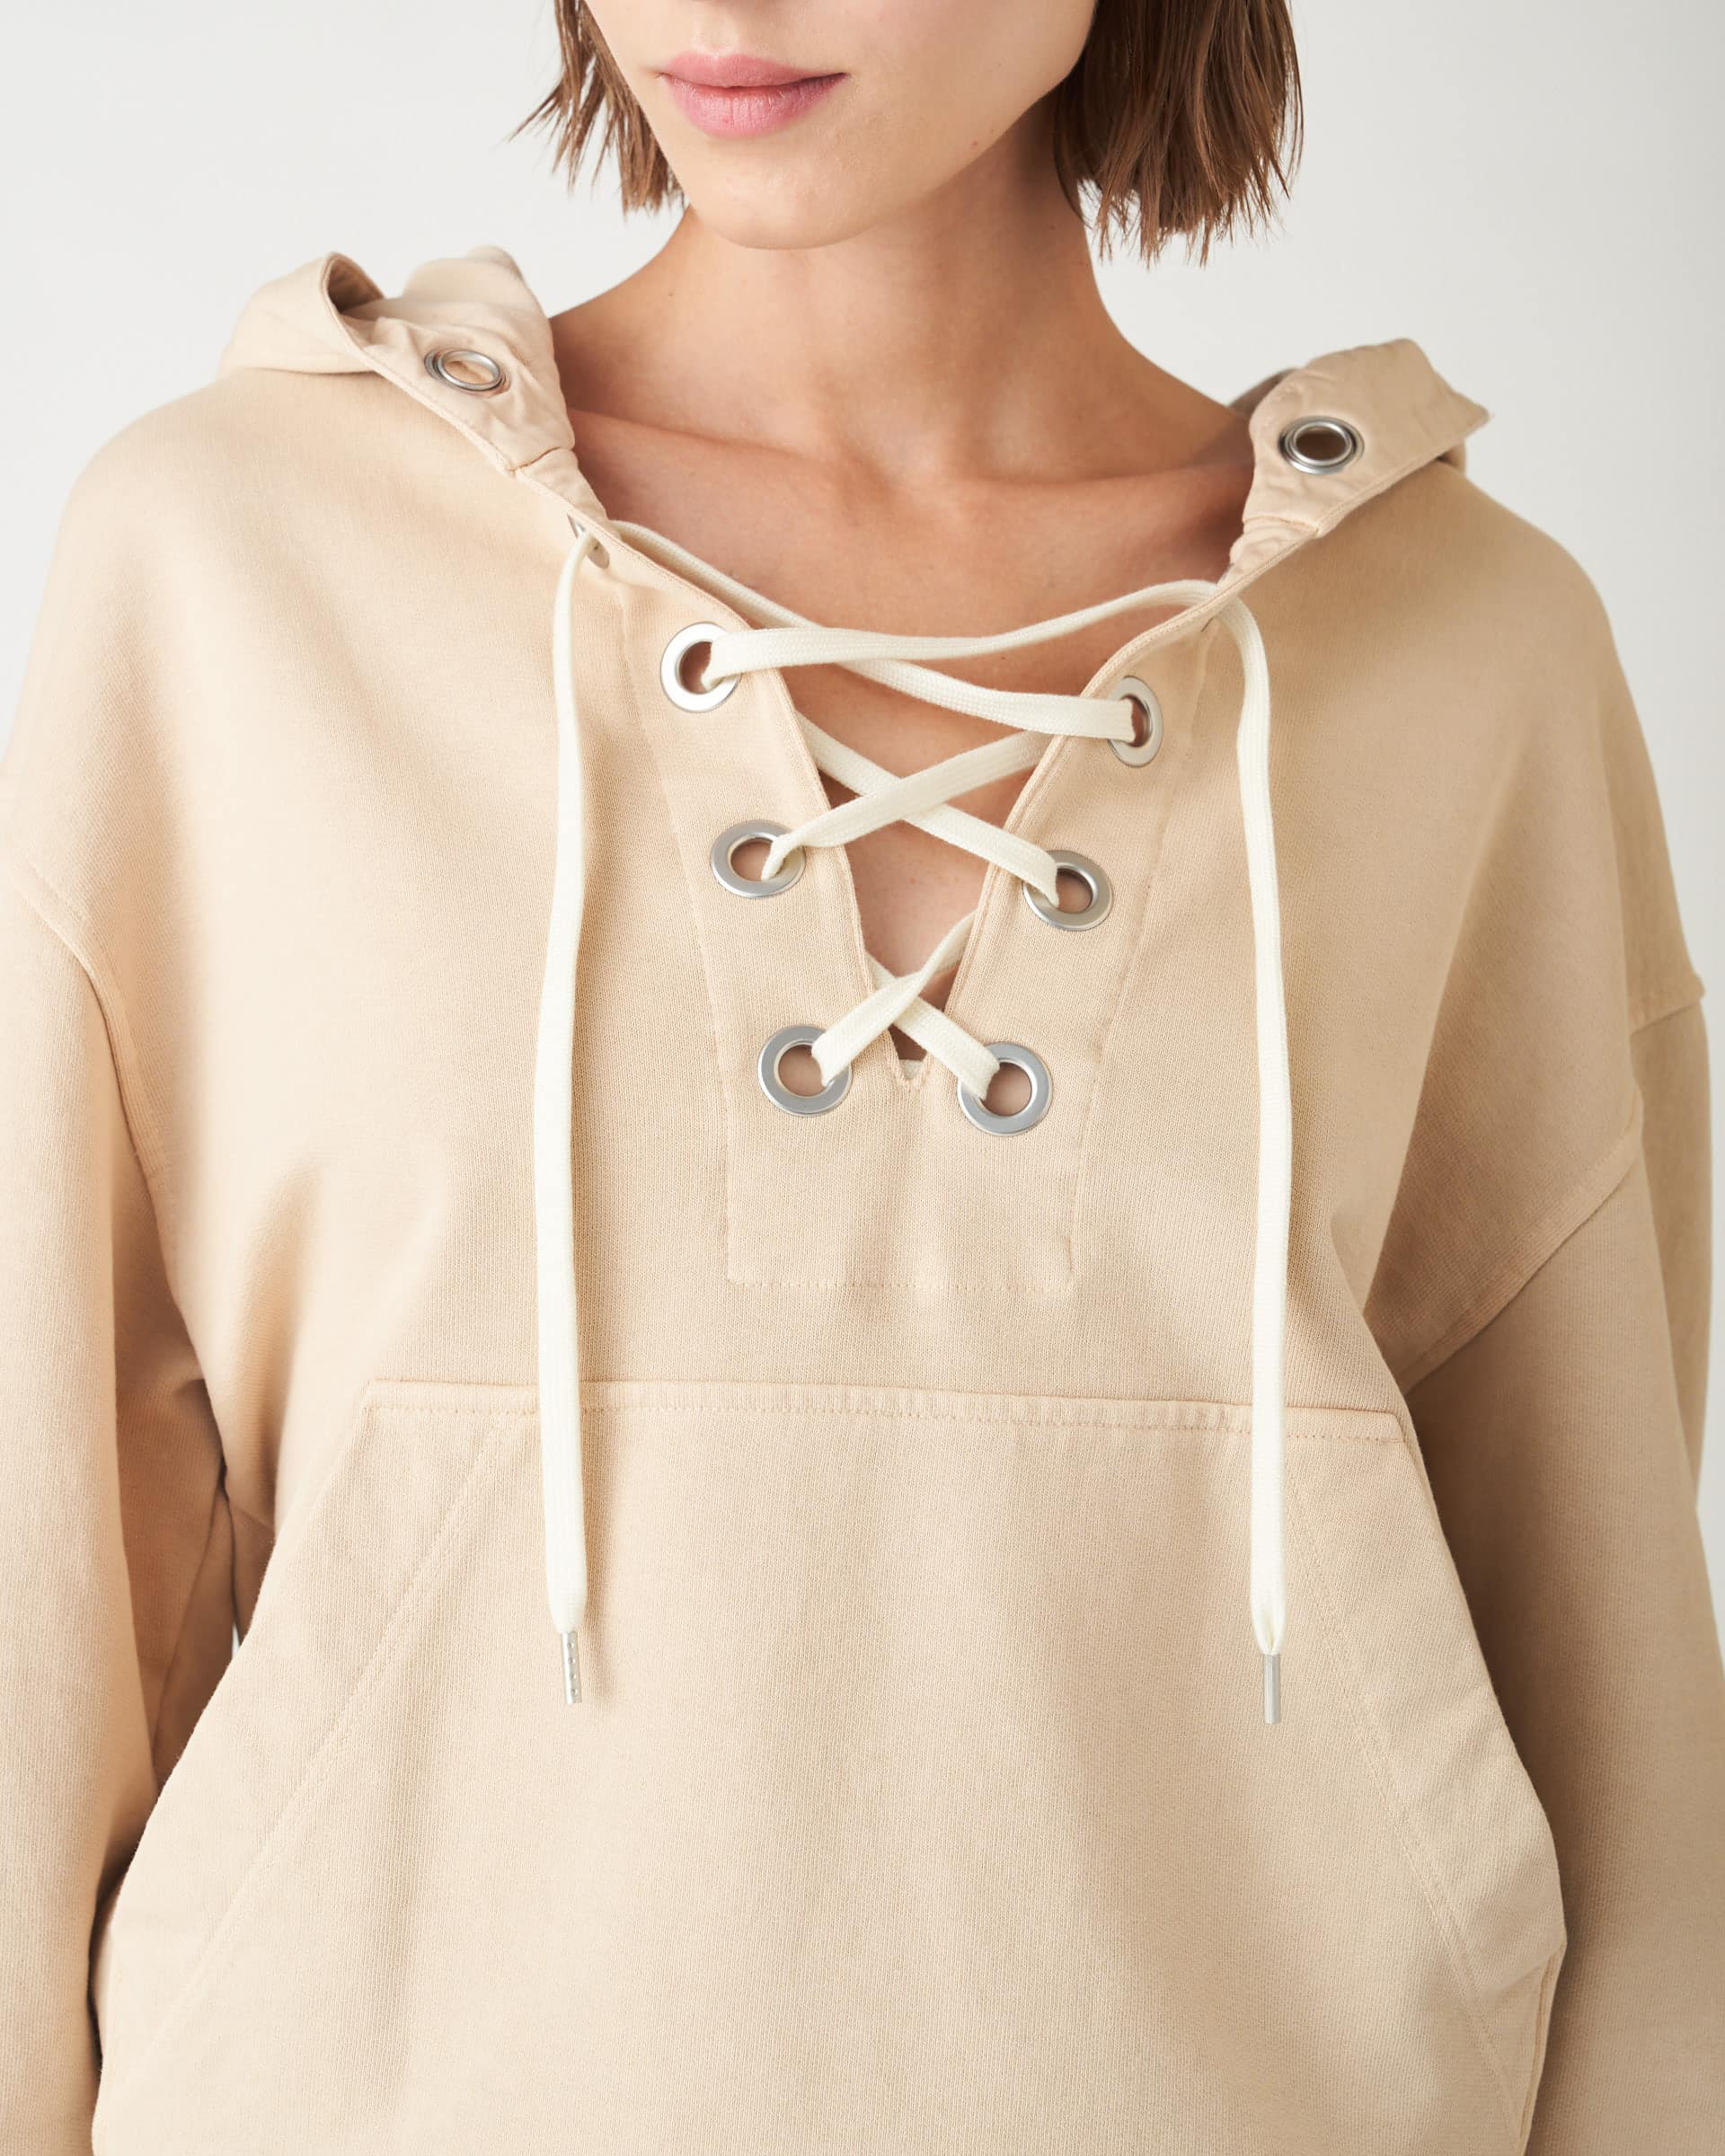 The Market Store | Hooded Sweatshirt With Sails